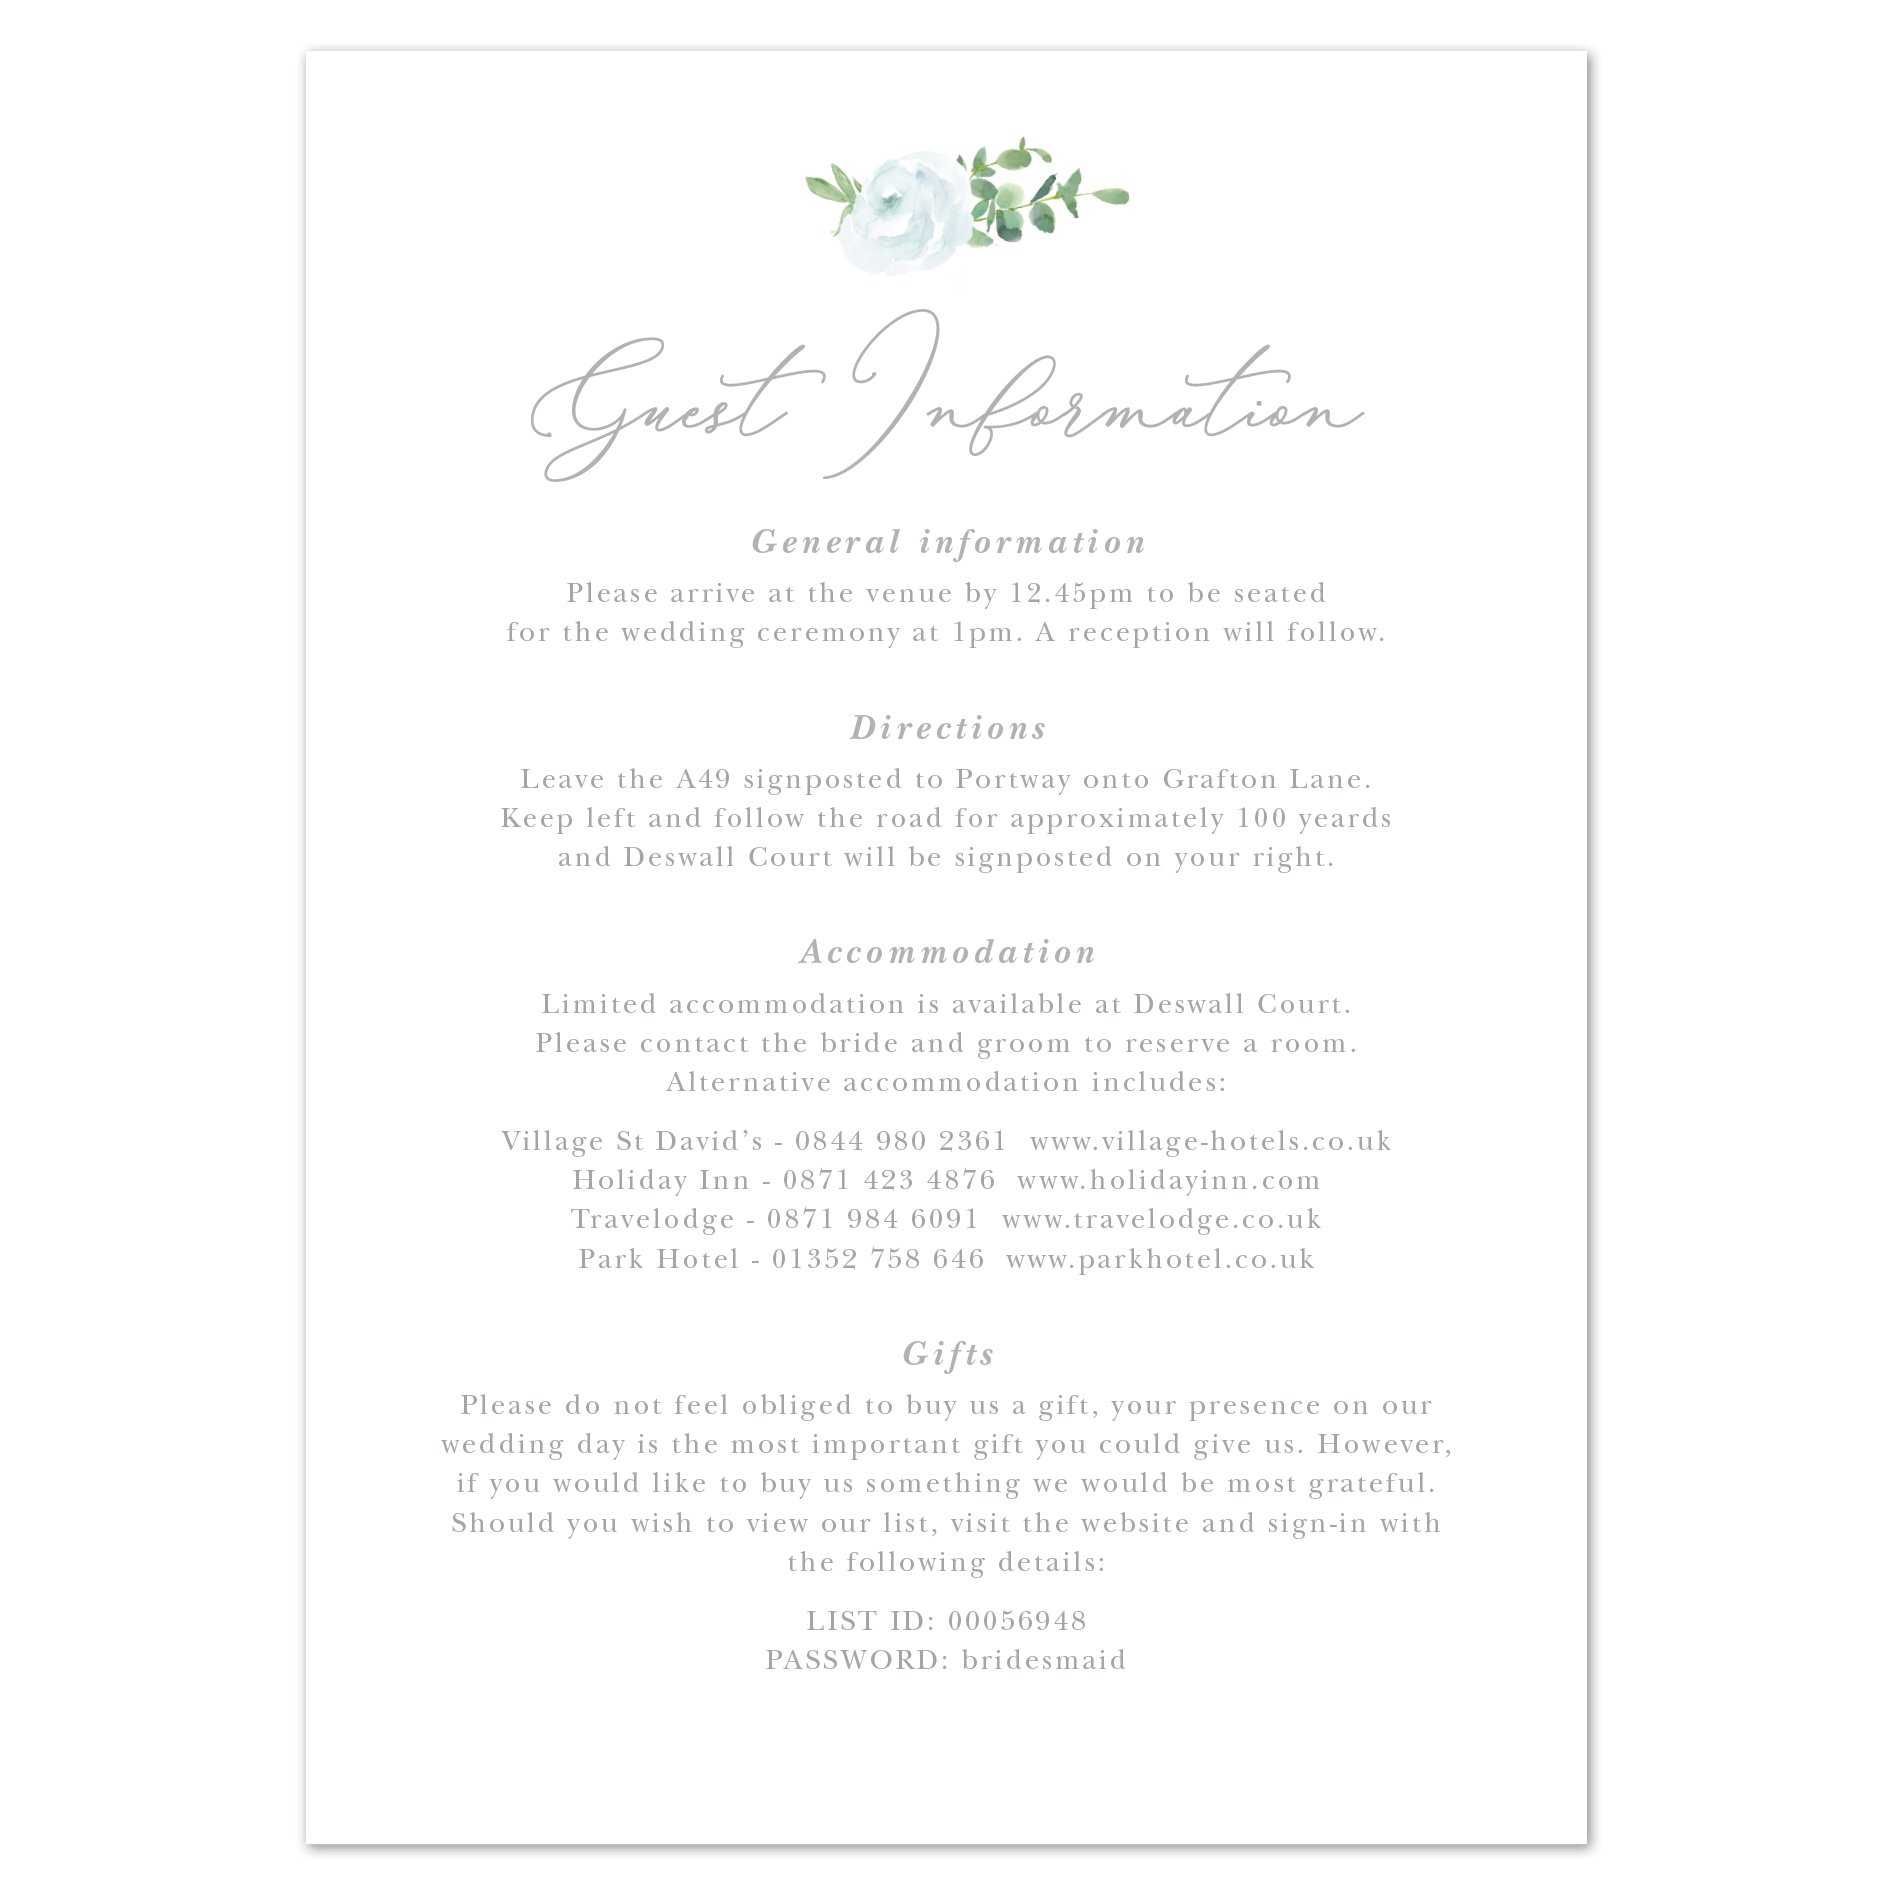 022 Wedding Registry Card Template Ideas Information Cards Intended For Wedding Hotel Information Card Template